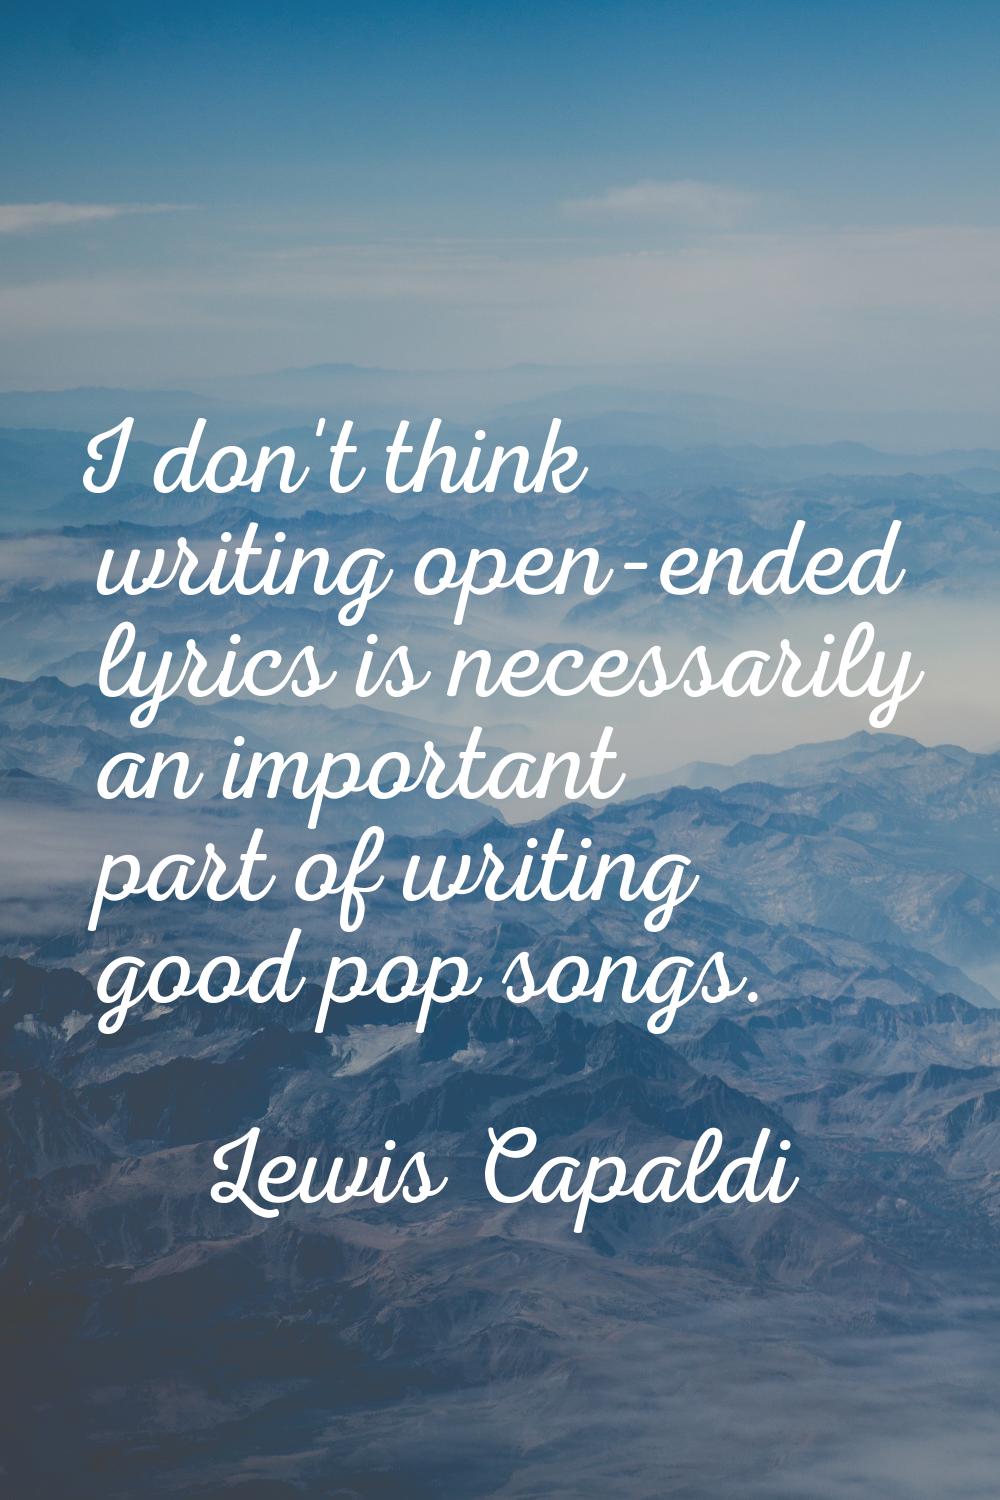 I don't think writing open-ended lyrics is necessarily an important part of writing good pop songs.